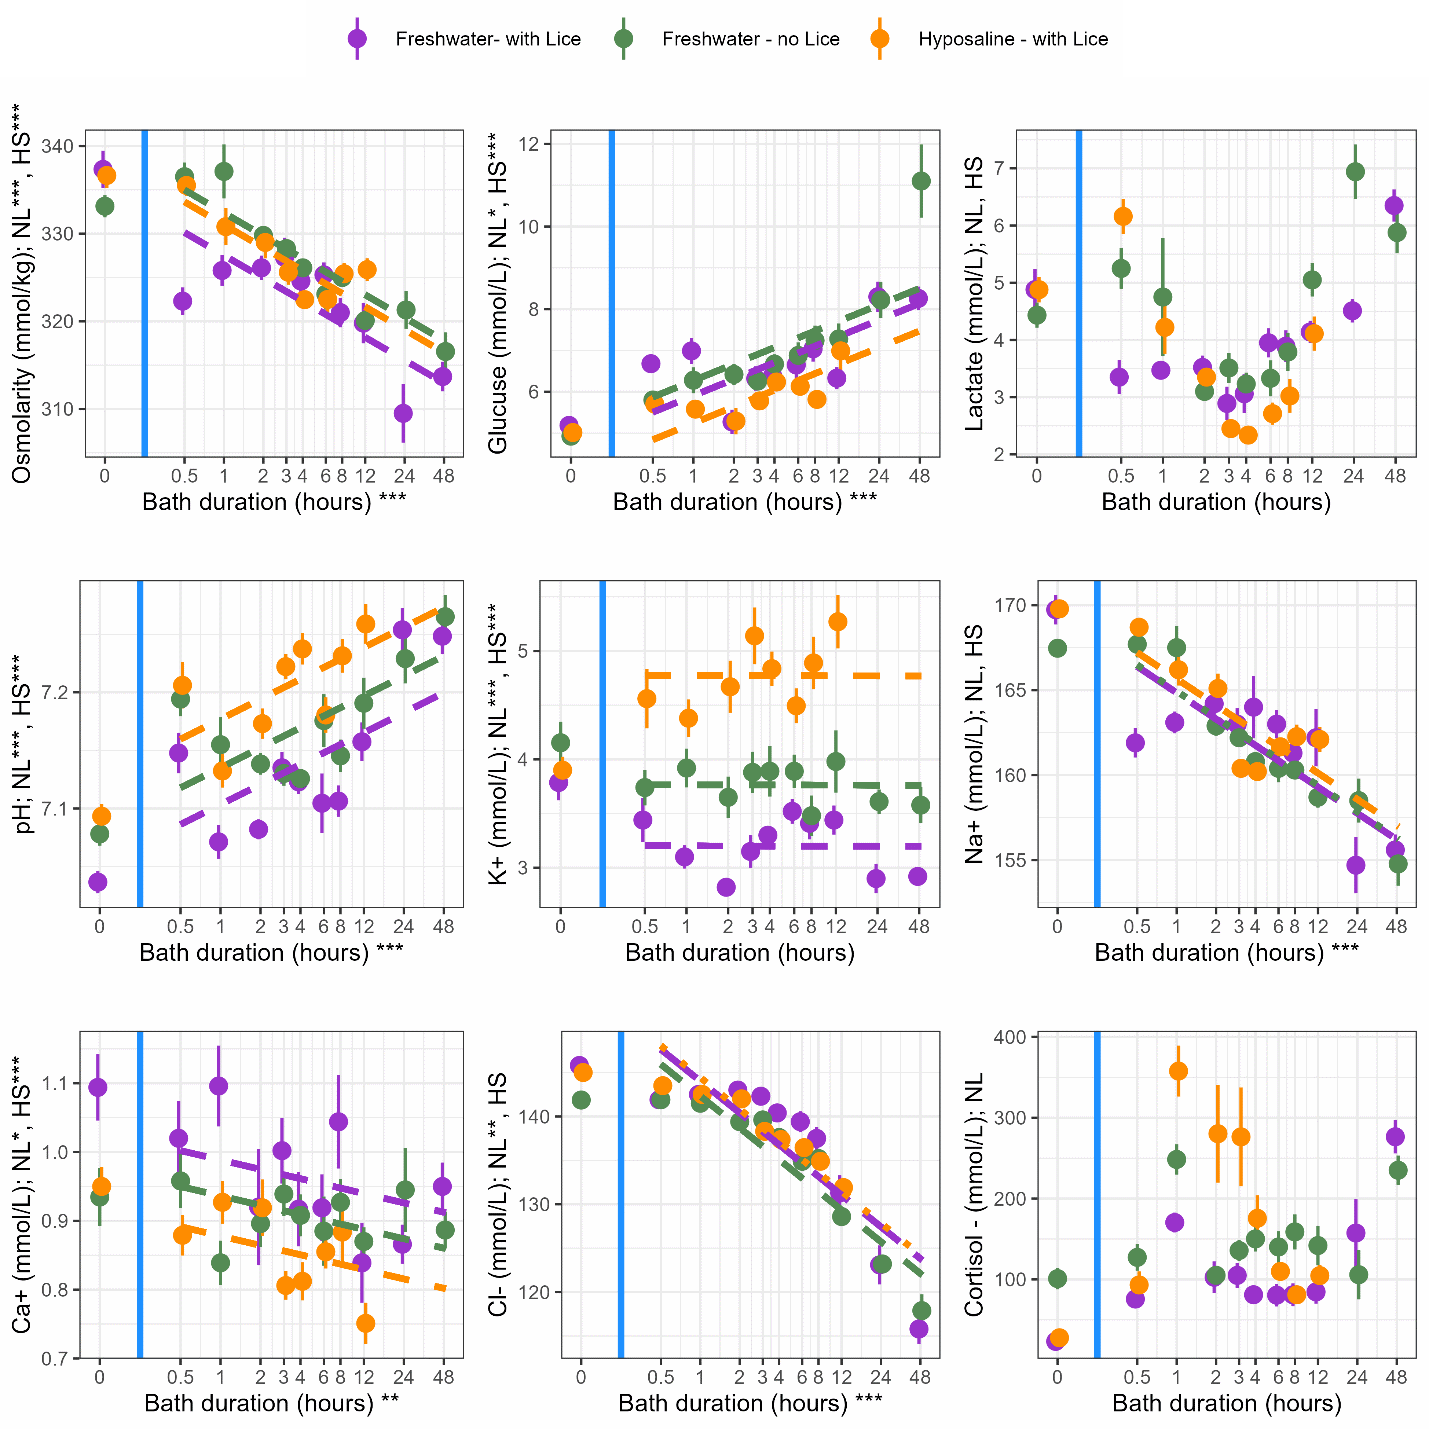 A figure with 9 separate plots of the blood parameters. The three treatments are present in each plot with a data point for the mean measurement at each bath duration. The following table has those data points for each measurement.


Treatment	Bath Duration	Osmolarity (mmol/kg); NL***, HS***	Glucuse (mmol/L); NL*, HS***"	Lactate (mmol/L); NL, HS	pH; NL***, HS***	K+ (mmol/L); NL***, HS***	Na+ (mmol/L); NL, HS	Cl- (mmol/L); NL**, HS	Ca+ (mmol/L); NL*, HS***	Cortisol_(mmol/L); NL, HS
Freshwater_Lice	0	337	5.2	4.9	7.0	3.8	170	146	1.1	23
Freshwater_Lice	30	322	6.7	3.4	7.1	3.4	162	142	1.0	76
Freshwater_Lice	60	326	7.0	3.5	7.1	3.1	163	143	1.1	170
Freshwater_Lice	120	326	5.3	3.5	7.1	2.8	164	143	0.9	103
Freshwater_Lice	180	327	6.3	2.9	7.1	3.2	163	142	1.0	105
Freshwater_Lice	240	325	6.4	3.1	7.1	3.3	164	140	0.9	81
Freshwater_Lice	360	325	6.7	4.0	7.1	3.5	163	139	0.9	80
Freshwater_Lice	480	321	7.0	3.9	7.1	3.4	161	138	1.0	81
Freshwater_Lice	720	320	6.3	4.1	7.2	3.4	162	131	0.8	85
Freshwater_Lice	1440	310	8.3	4.5	7.3	2.9	155	123	0.9	157
Freshwater_Lice	2880	314	8.3	6.4	7.2	2.9	156	116	1.0	276
Freshwater_No Lice	0	333	4.9	4.4	7.1	4.2	167	142	0.9	101
Freshwater_No Lice	30	337	5.8	5.3	7.2	3.7	168	142	1.0	127
Freshwater_No Lice	60	337	6.3	4.8	7.2	3.9	168	142	0.8	248
Freshwater_No Lice	120	330	6.4	3.1	7.1	3.7	163	139	0.9	105
Freshwater_No Lice	180	328	6.3	3.5	7.1	3.9	162	140	0.9	136
Freshwater_No Lice	240	326	6.7	3.2	7.1	3.9	161	138	0.9	150
Freshwater_No Lice	360	323	6.9	3.3	7.2	3.9	160	135	0.9	140
Freshwater_No Lice	480	325	7.2	3.8	7.1	3.5	160	135	0.9	159
Freshwater_No Lice	720	320	7.3	5.1	7.2	4.0	159	129	0.9	142
Freshwater_No Lice	1440	321	8.2	6.9	7.2	3.6	159	123	0.9	106
Freshwater_No Lice	2880	317	11.1	5.9	7.3	3.6	155	118	0.9	235
Hyposaline_Lice	0	337	5.0	4.9	7.1	3.9	170	145	1.0	28
Hyposaline_Lice	30	336	5.7	6.2	7.2	4.6	169	144	0.9	93
Hyposaline_Lice	60	331	5.6	4.2	7.1	4.4	166	143	0.9	358
Hyposaline_Lice	120	329	5.3	3.4	7.2	4.7	165	142	0.9	280
Hyposaline_Lice	180	326	5.8	2.5	7.2	5.1	160	138	0.8	276
Hyposaline_Lice	240	322	6.2	2.3	7.2	4.8	160	137	0.8	176
Hyposaline_Lice	360	323	6.1	2.7	7.2	4.5	162	136	0.9	110
Hyposaline_Lice	480	325	5.8	3.0	7.2	4.9	162	135	0.9	81
Hyposaline_Lice	720	326	7.0	4.1	7.3	5.3	162	132	0.8	105
